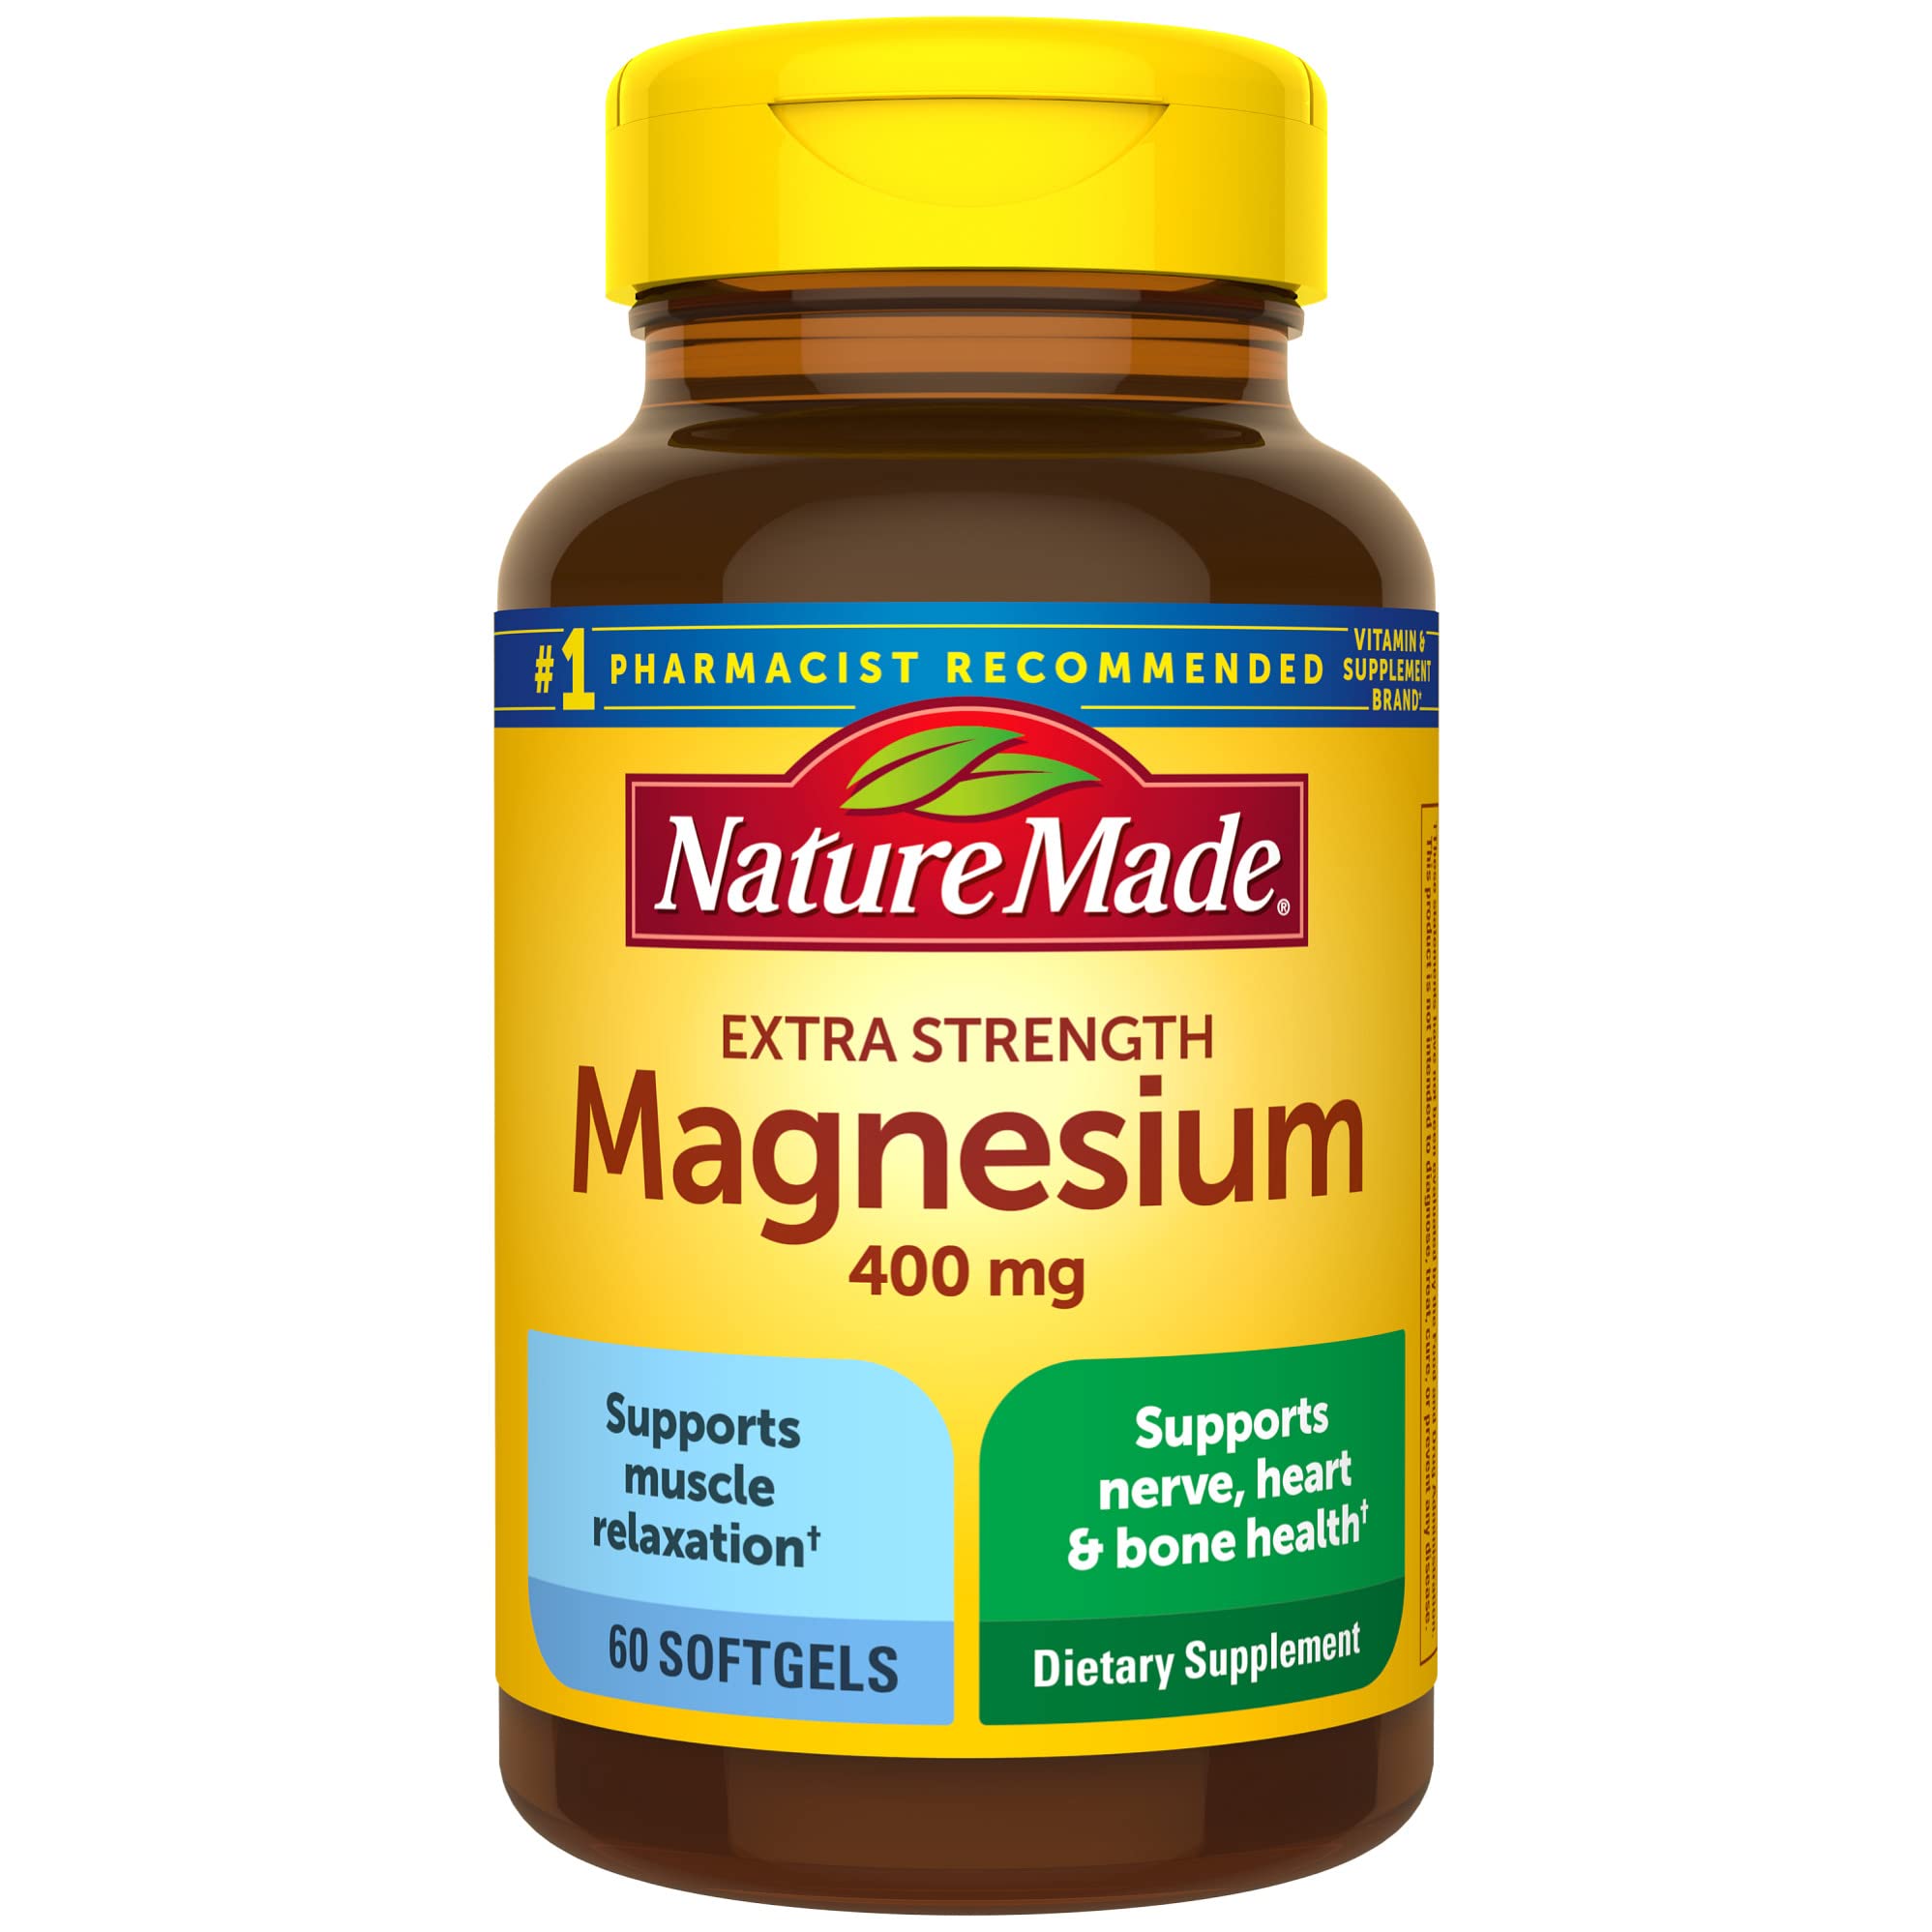 Nature Made Extra Strength Magnesium Oxide 400 mg, Dietary Supplement for Muscle, Nerve, Bone and Heart Support, 60 Softgels, 60 Day Supply